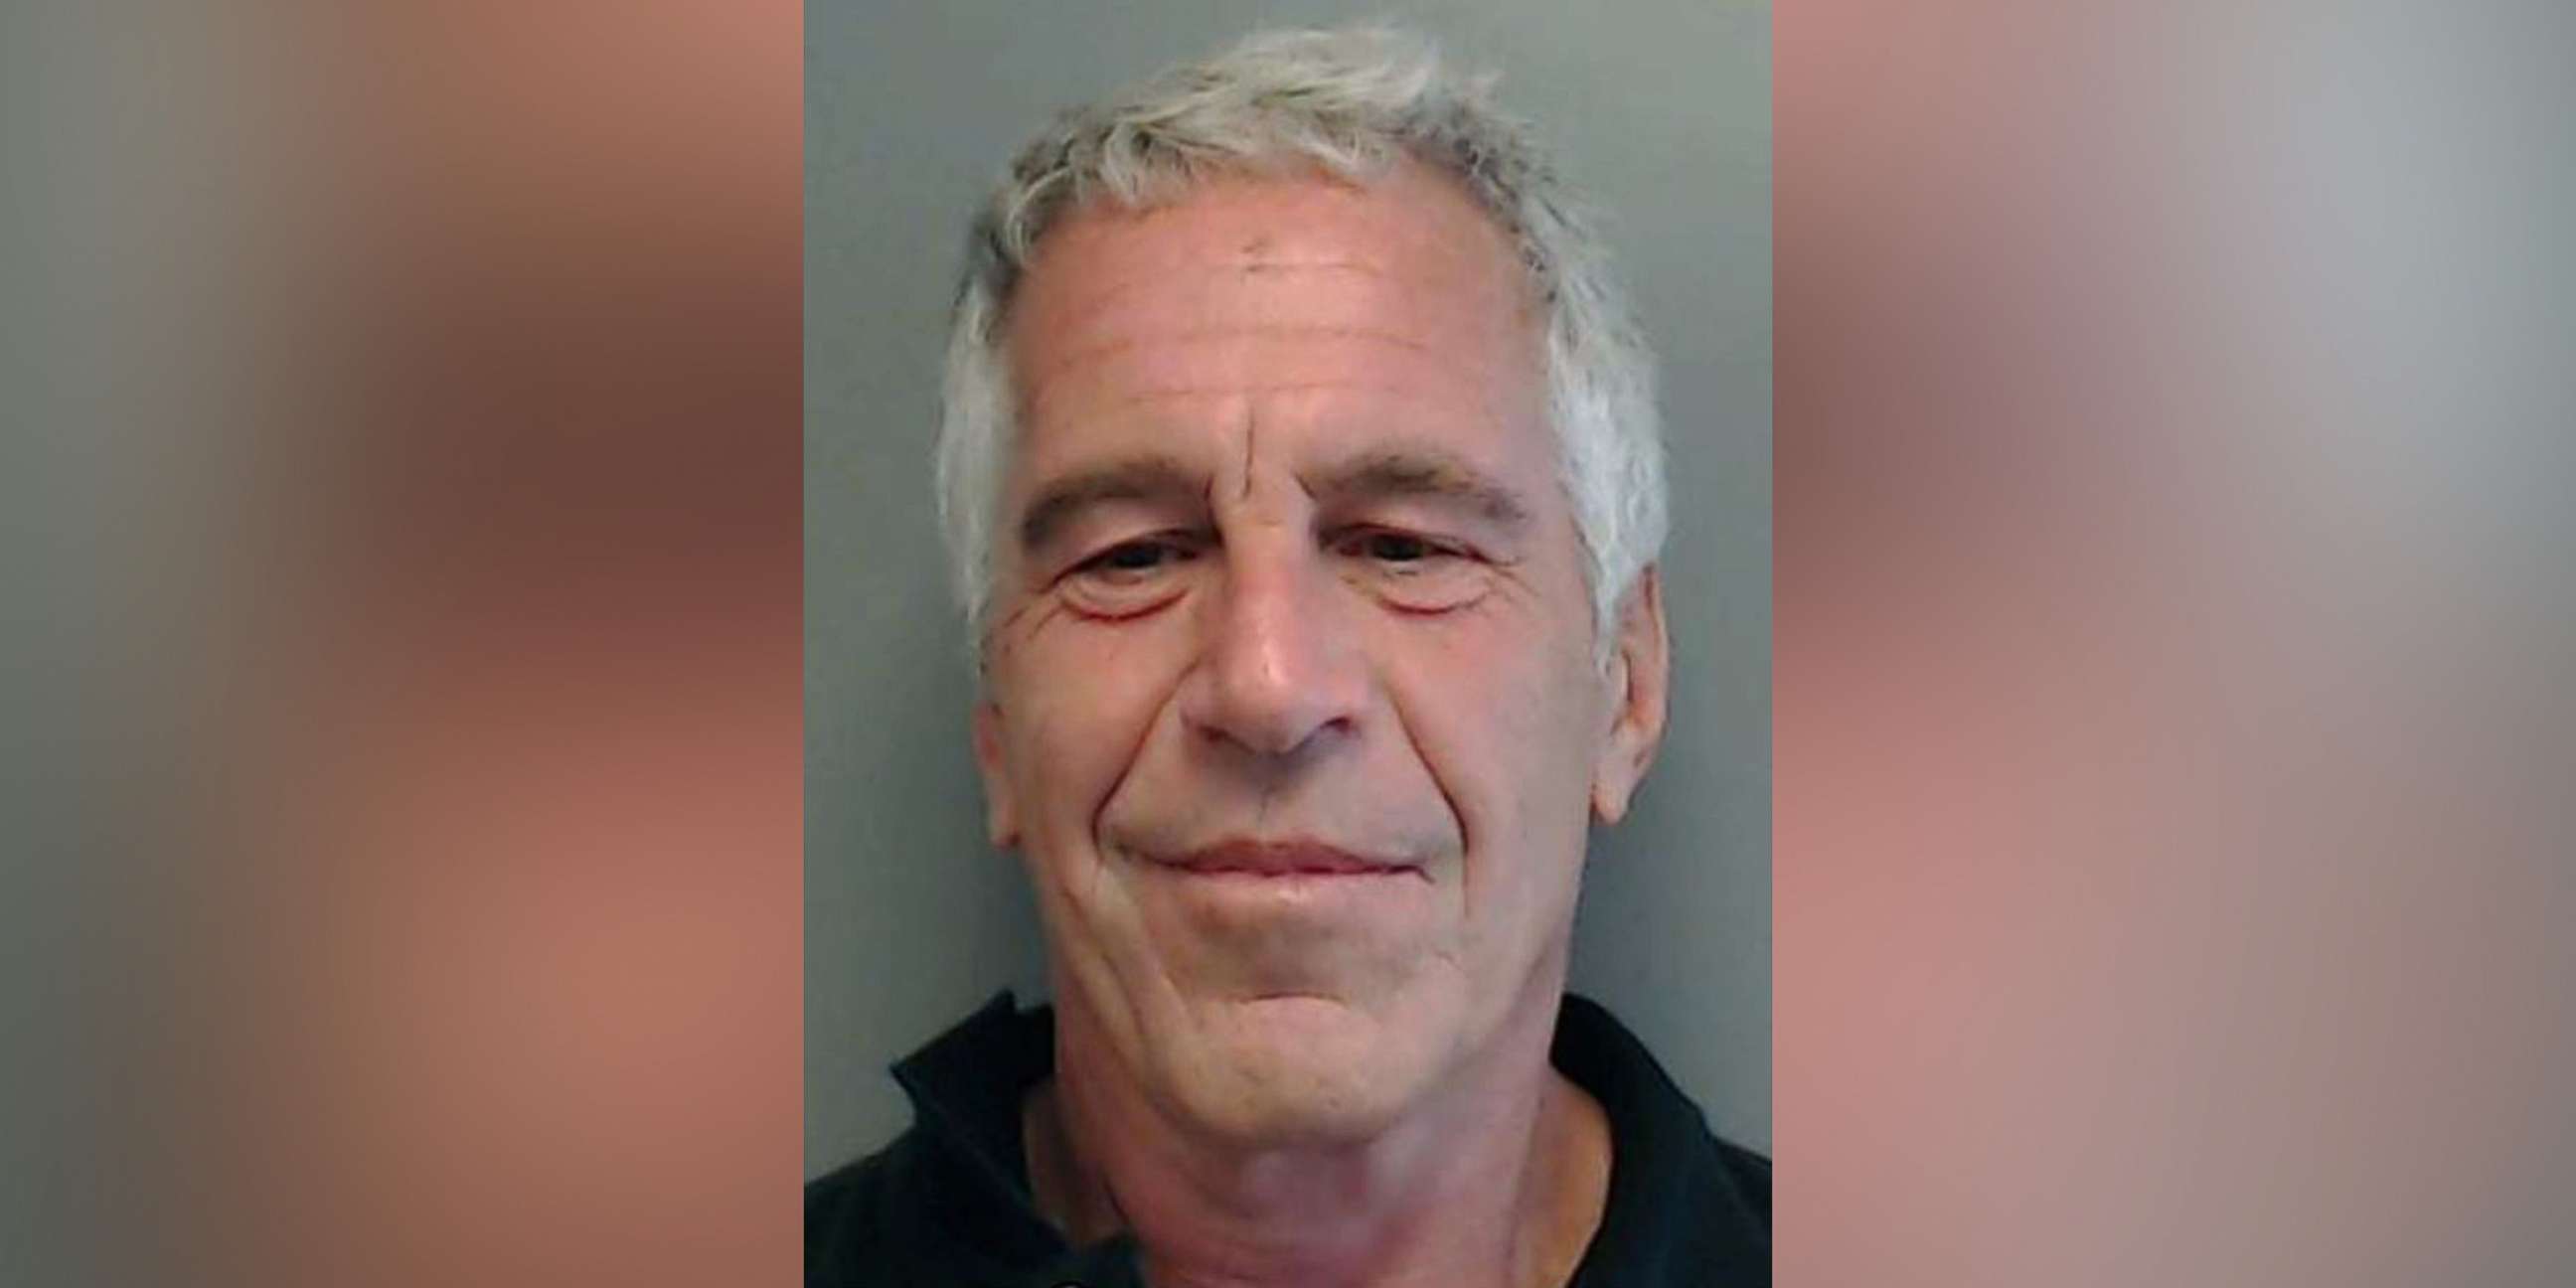 PHOTO: Jeffrey Epstein in a 2013 photo released by the Florida Department of Law Enforcement.